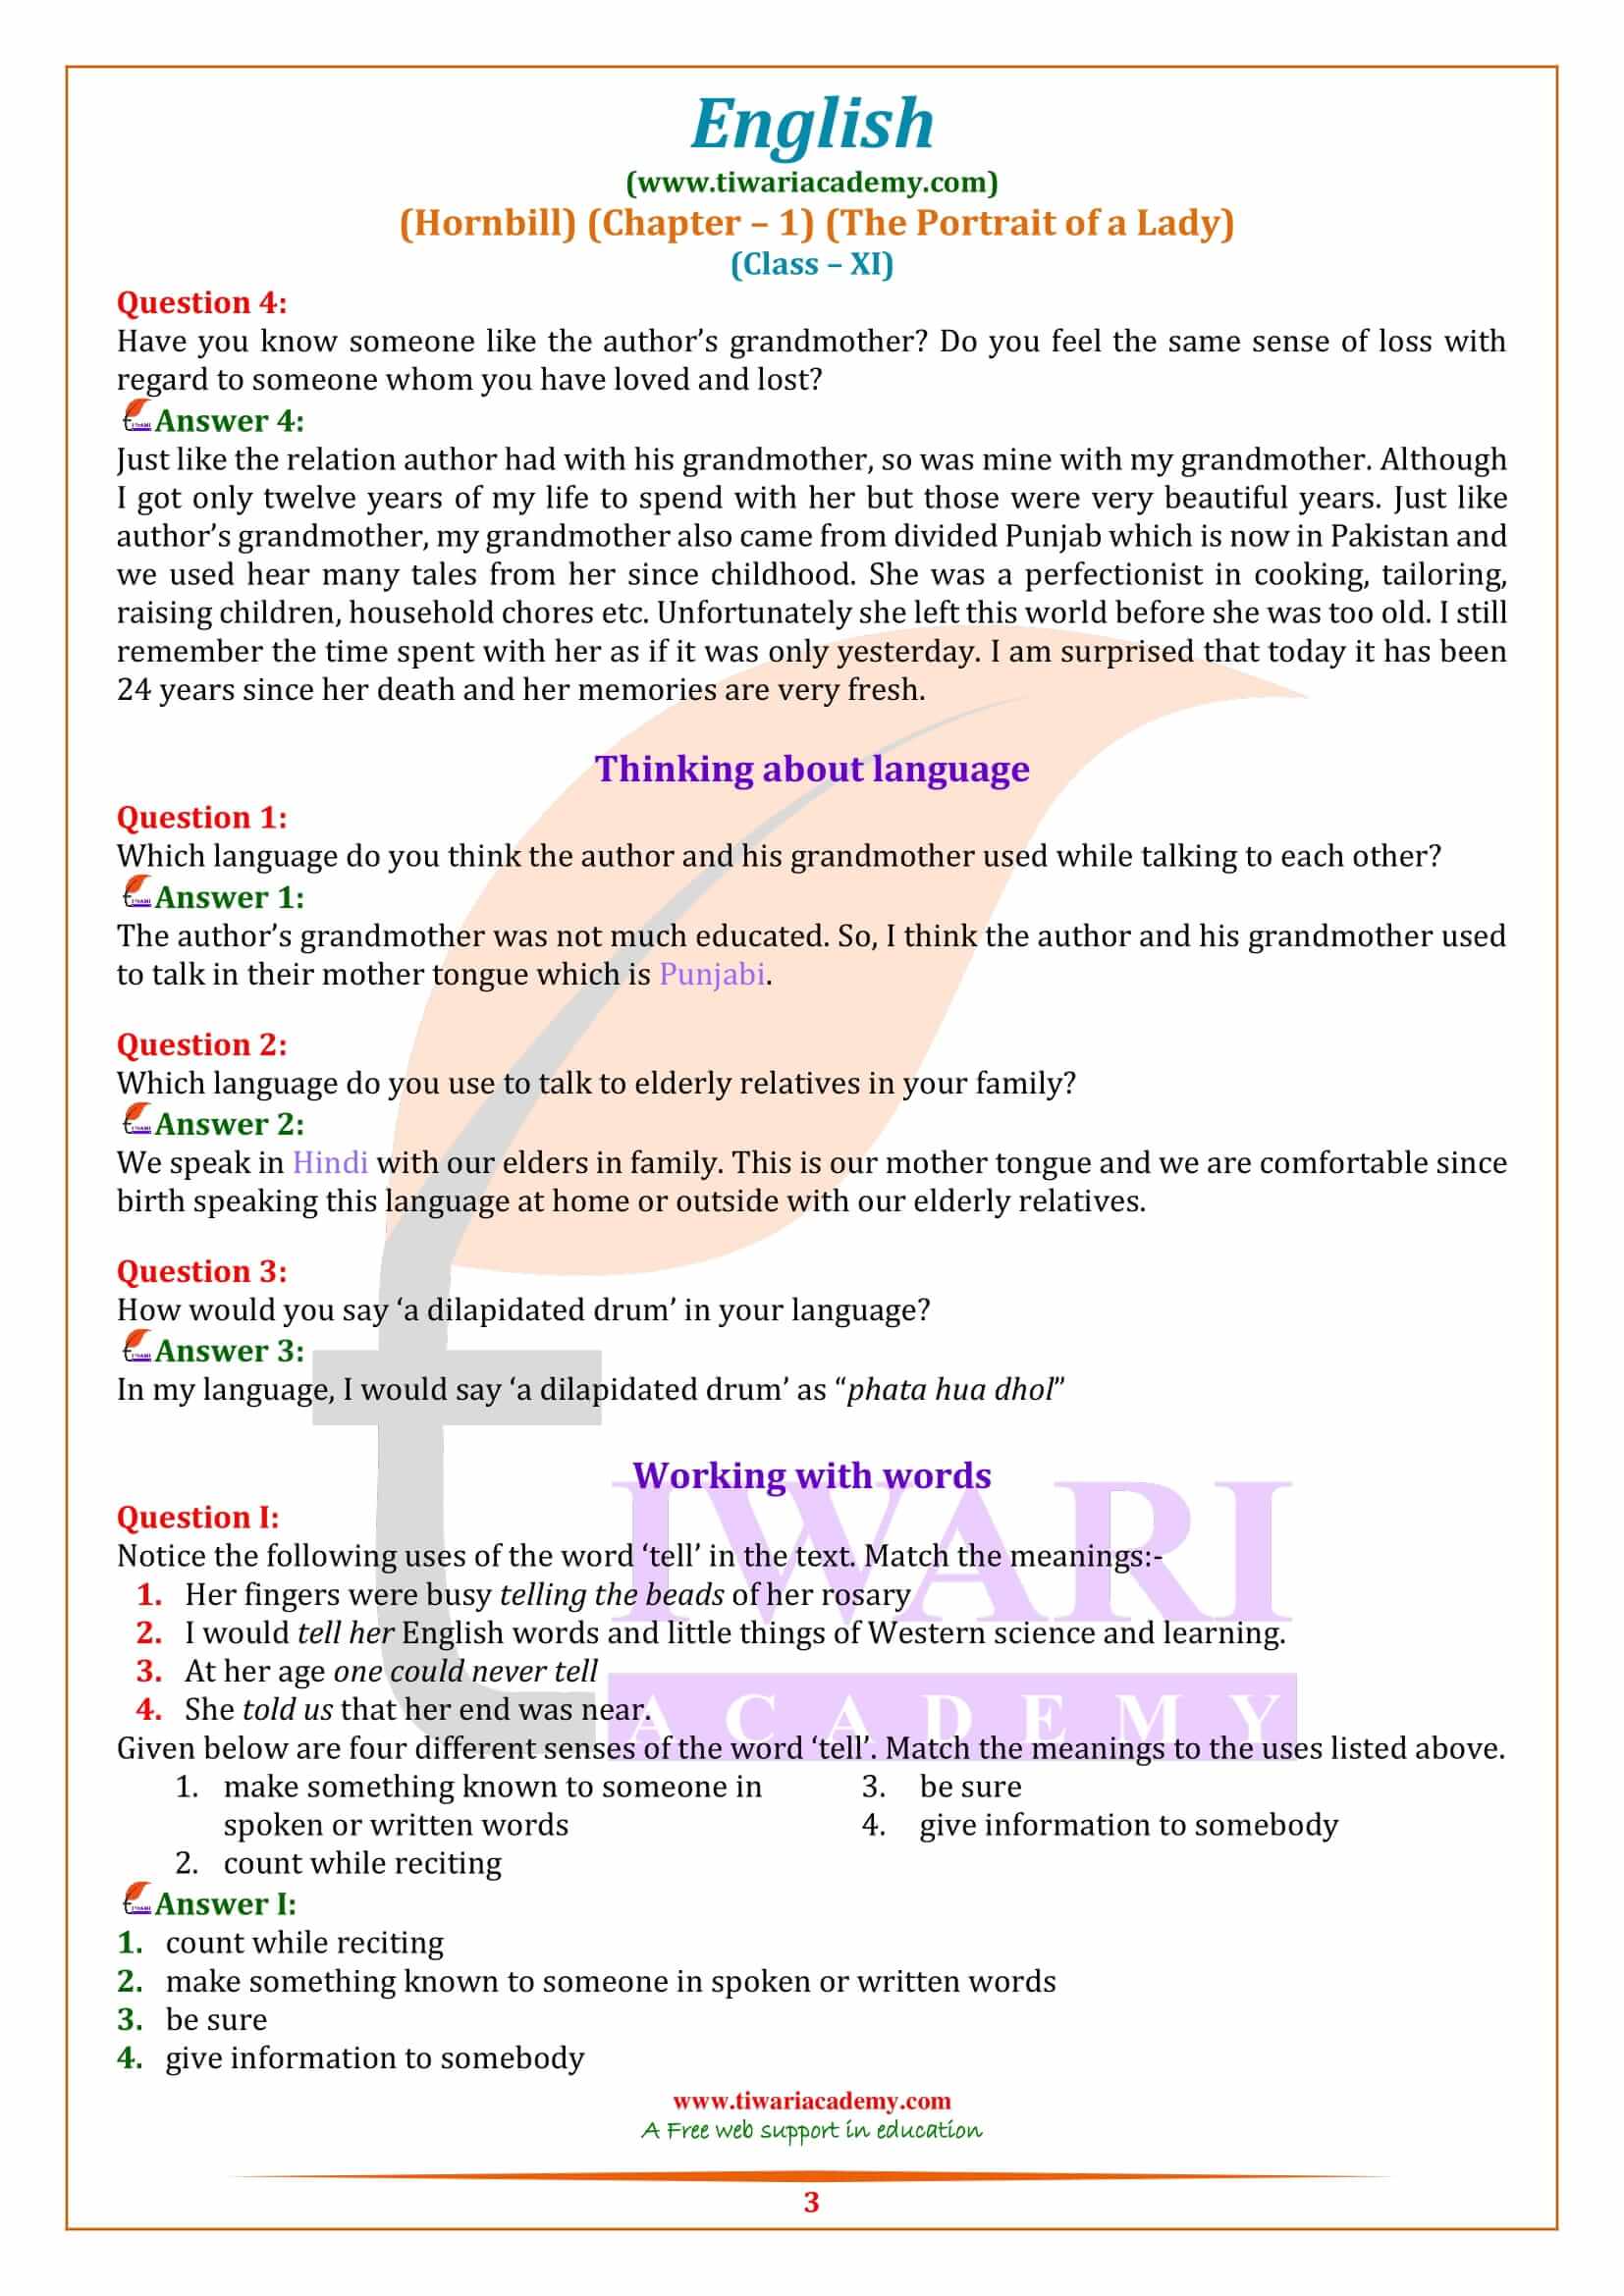 NCERT Solutions for Class 11 English Hornbill Chapter 1 Exercises